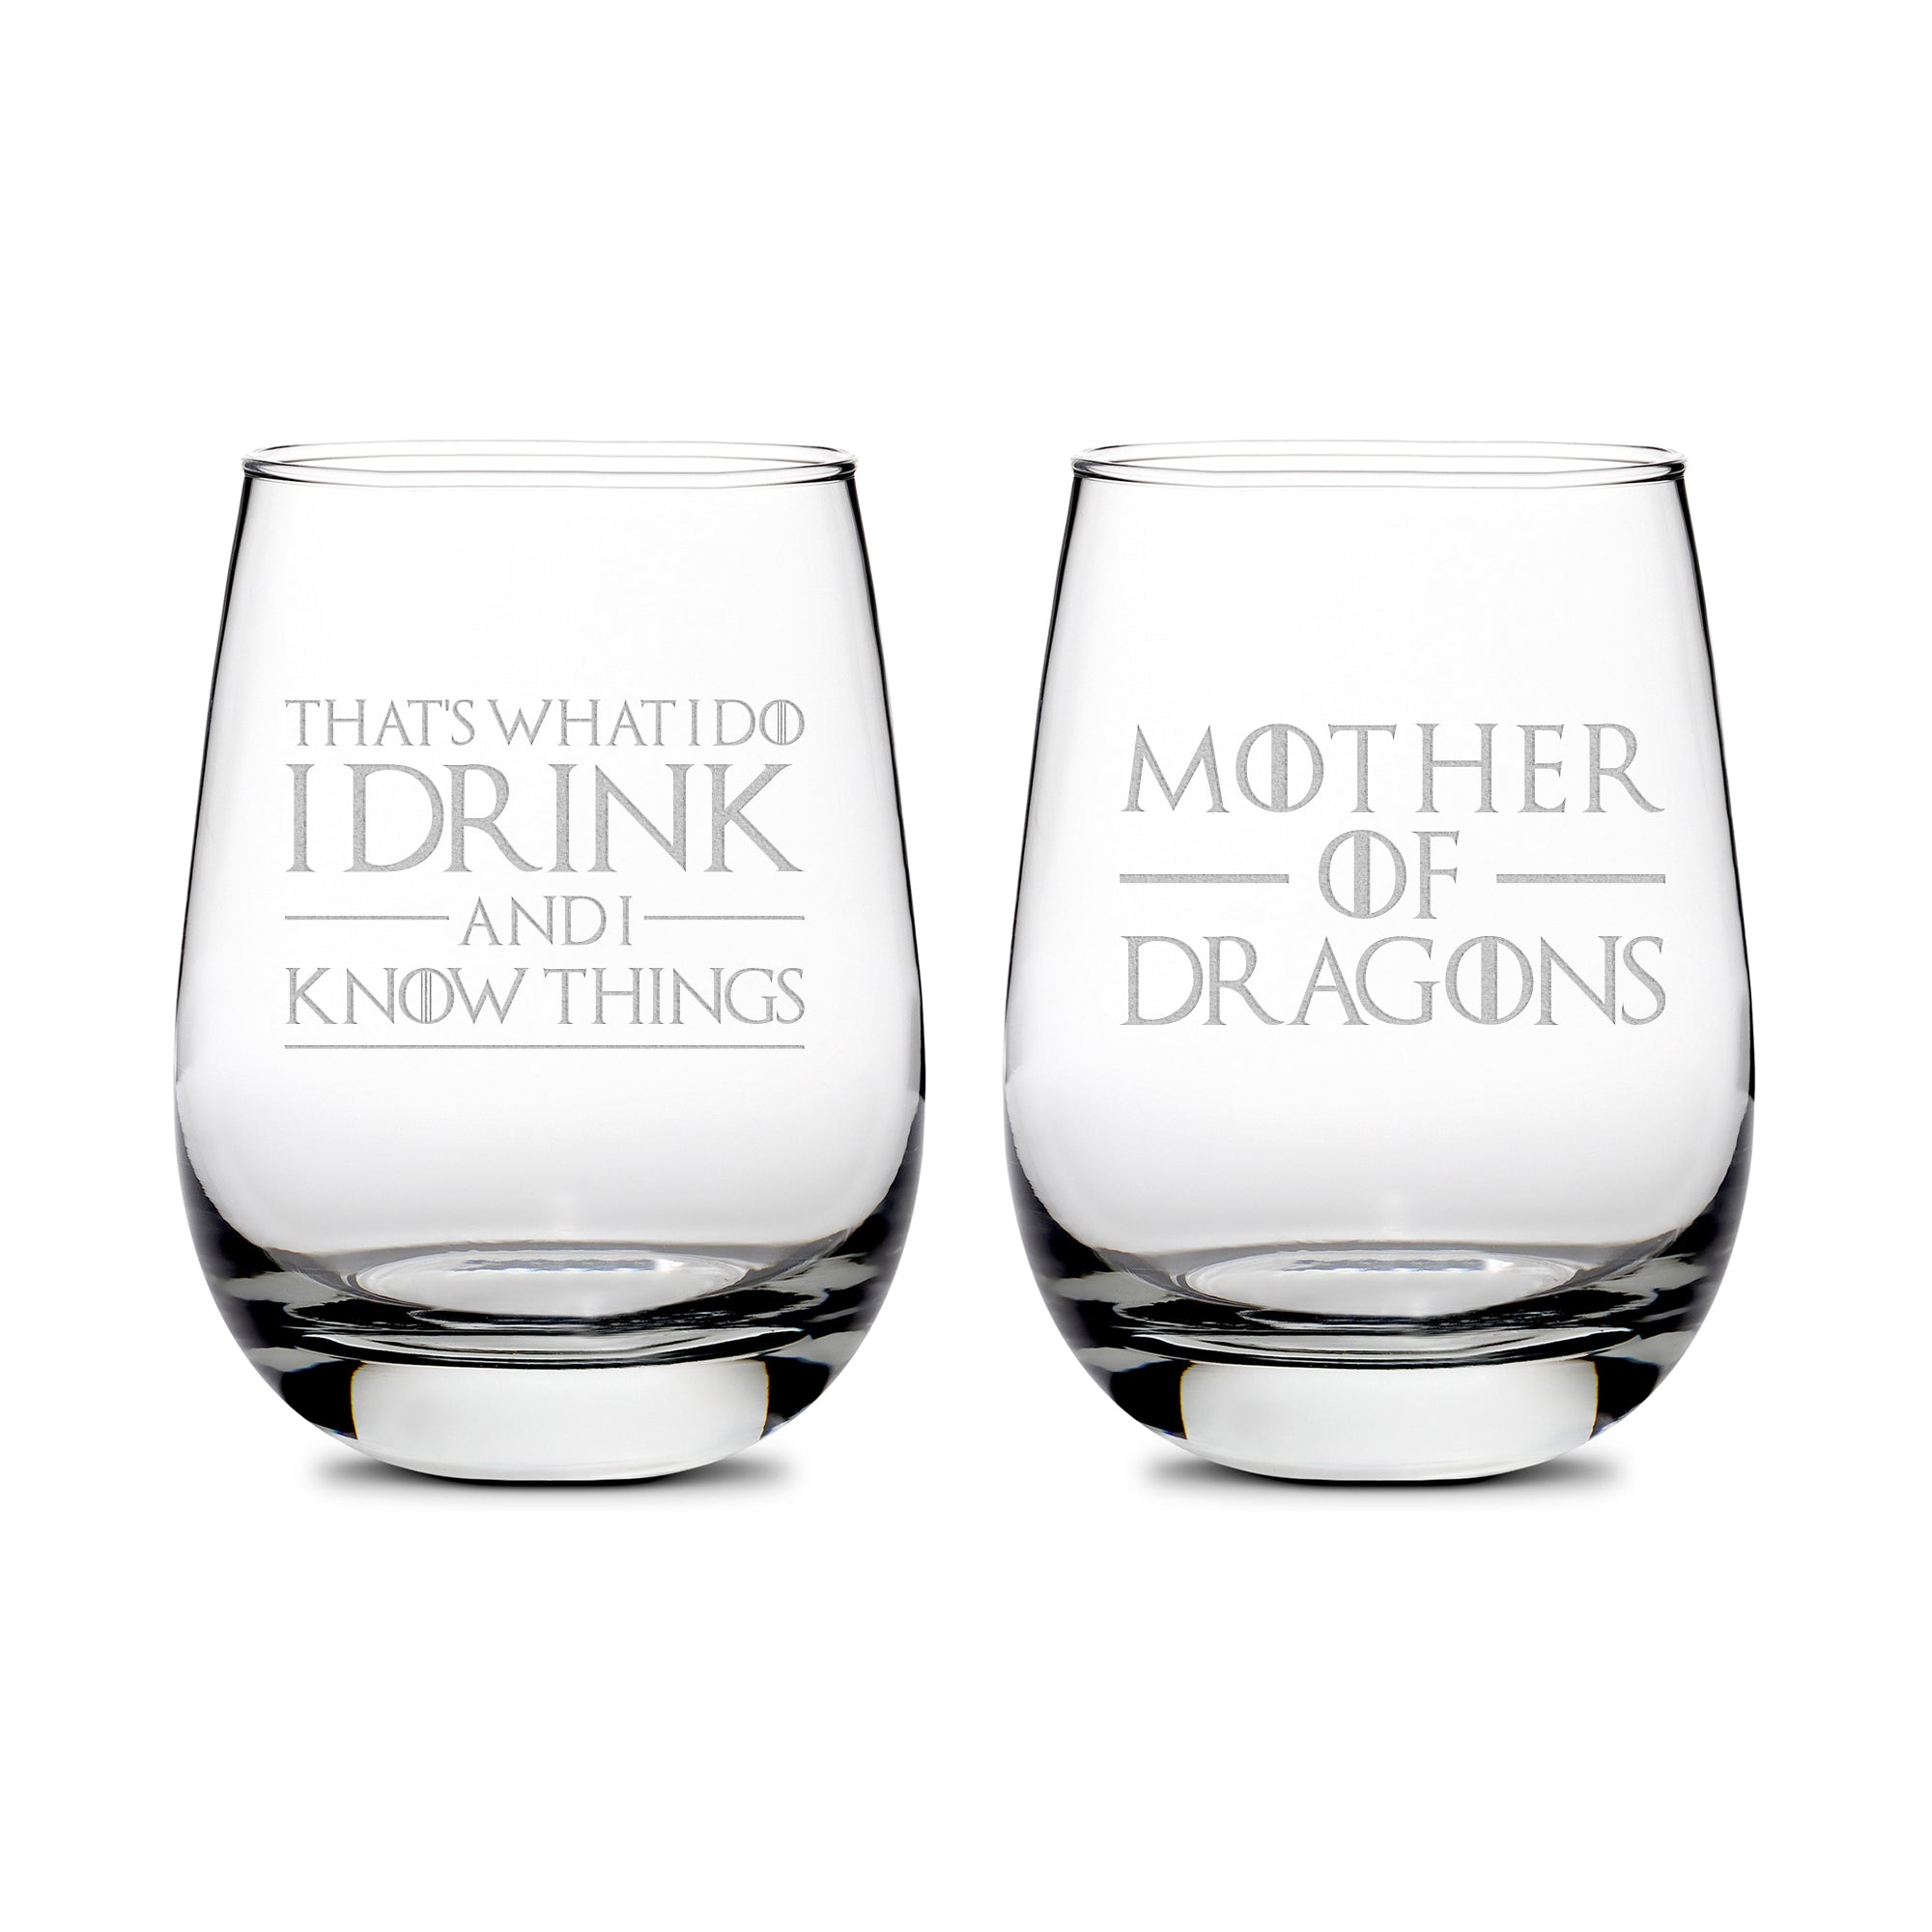 Premium Wine Glasses, Game of Thrones, I Drink and I Know Things, Mother of Dragons, 16oz (Set of 2), Laser Etched or Hand Etched